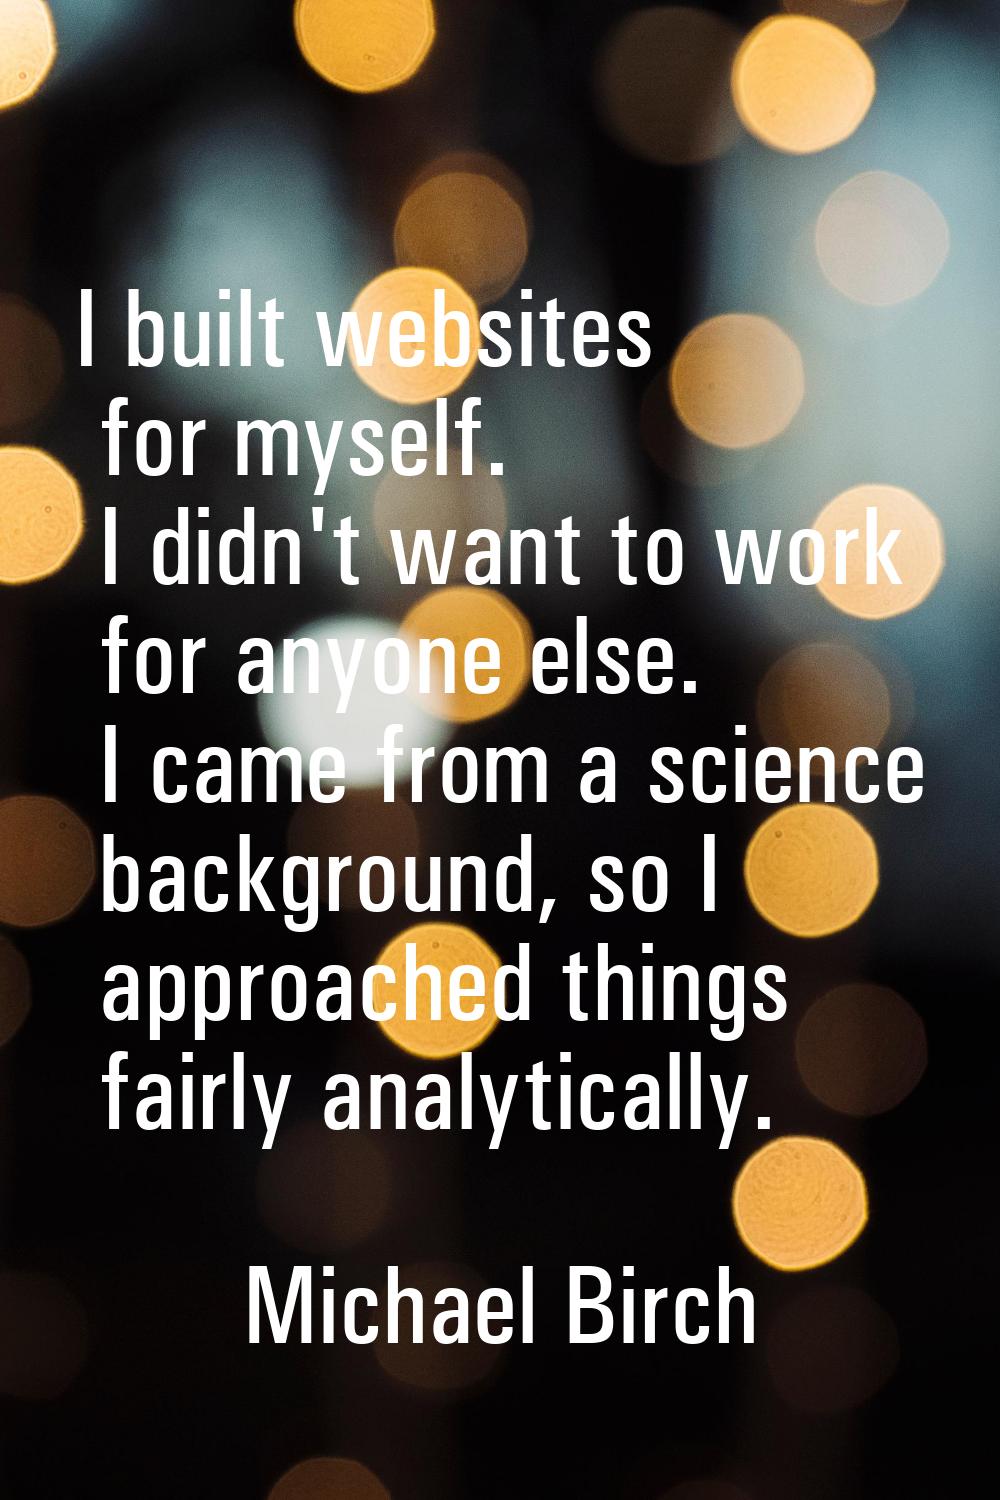 I built websites for myself. I didn't want to work for anyone else. I came from a science backgroun